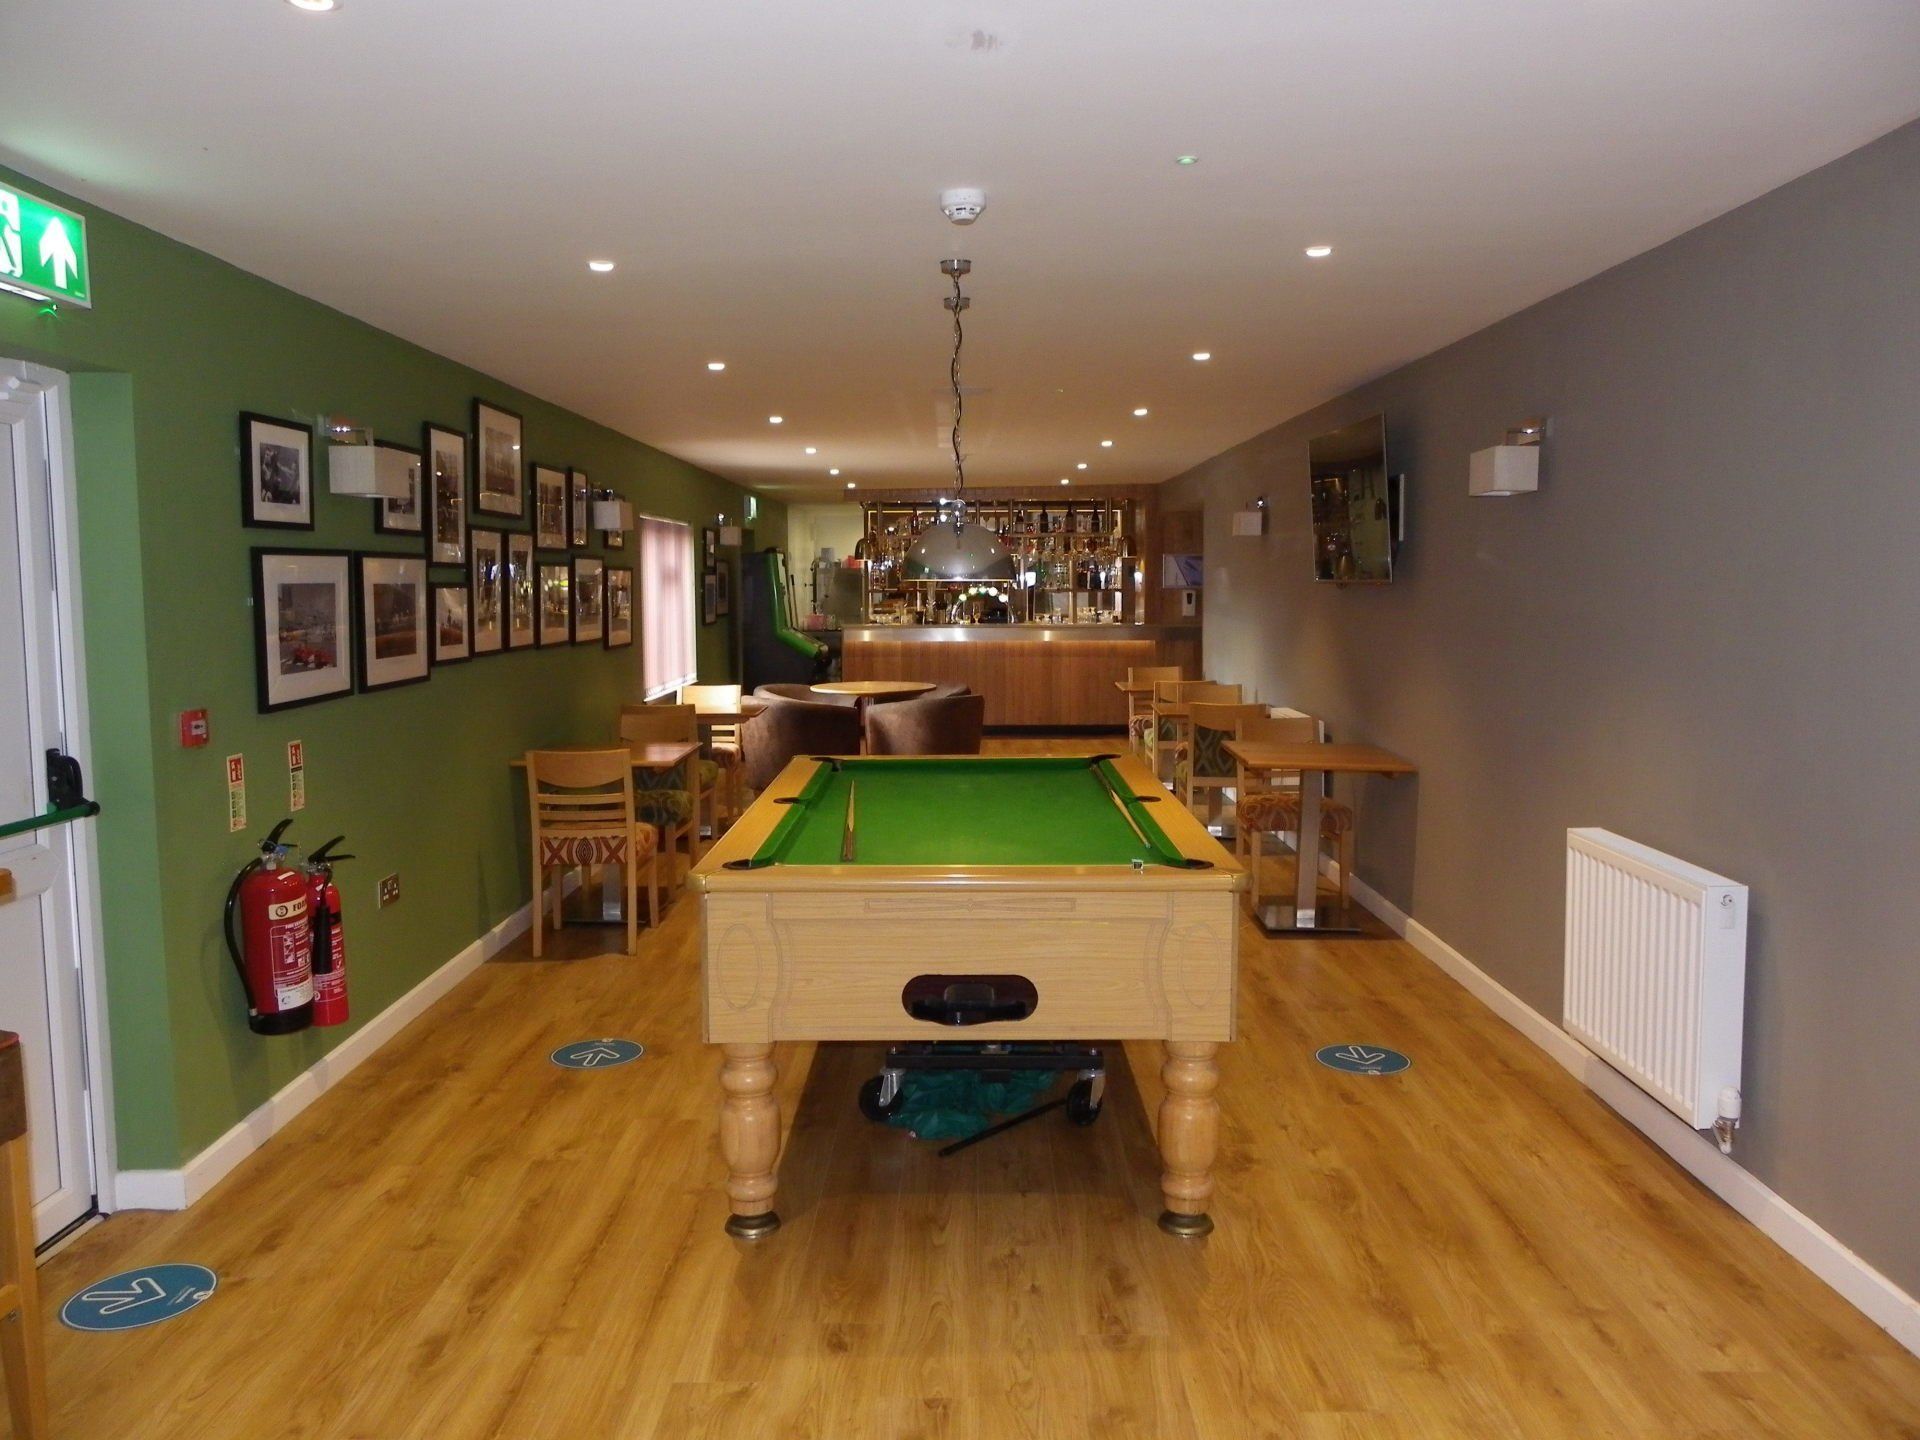 Pool table at our holiday park clubhouse.